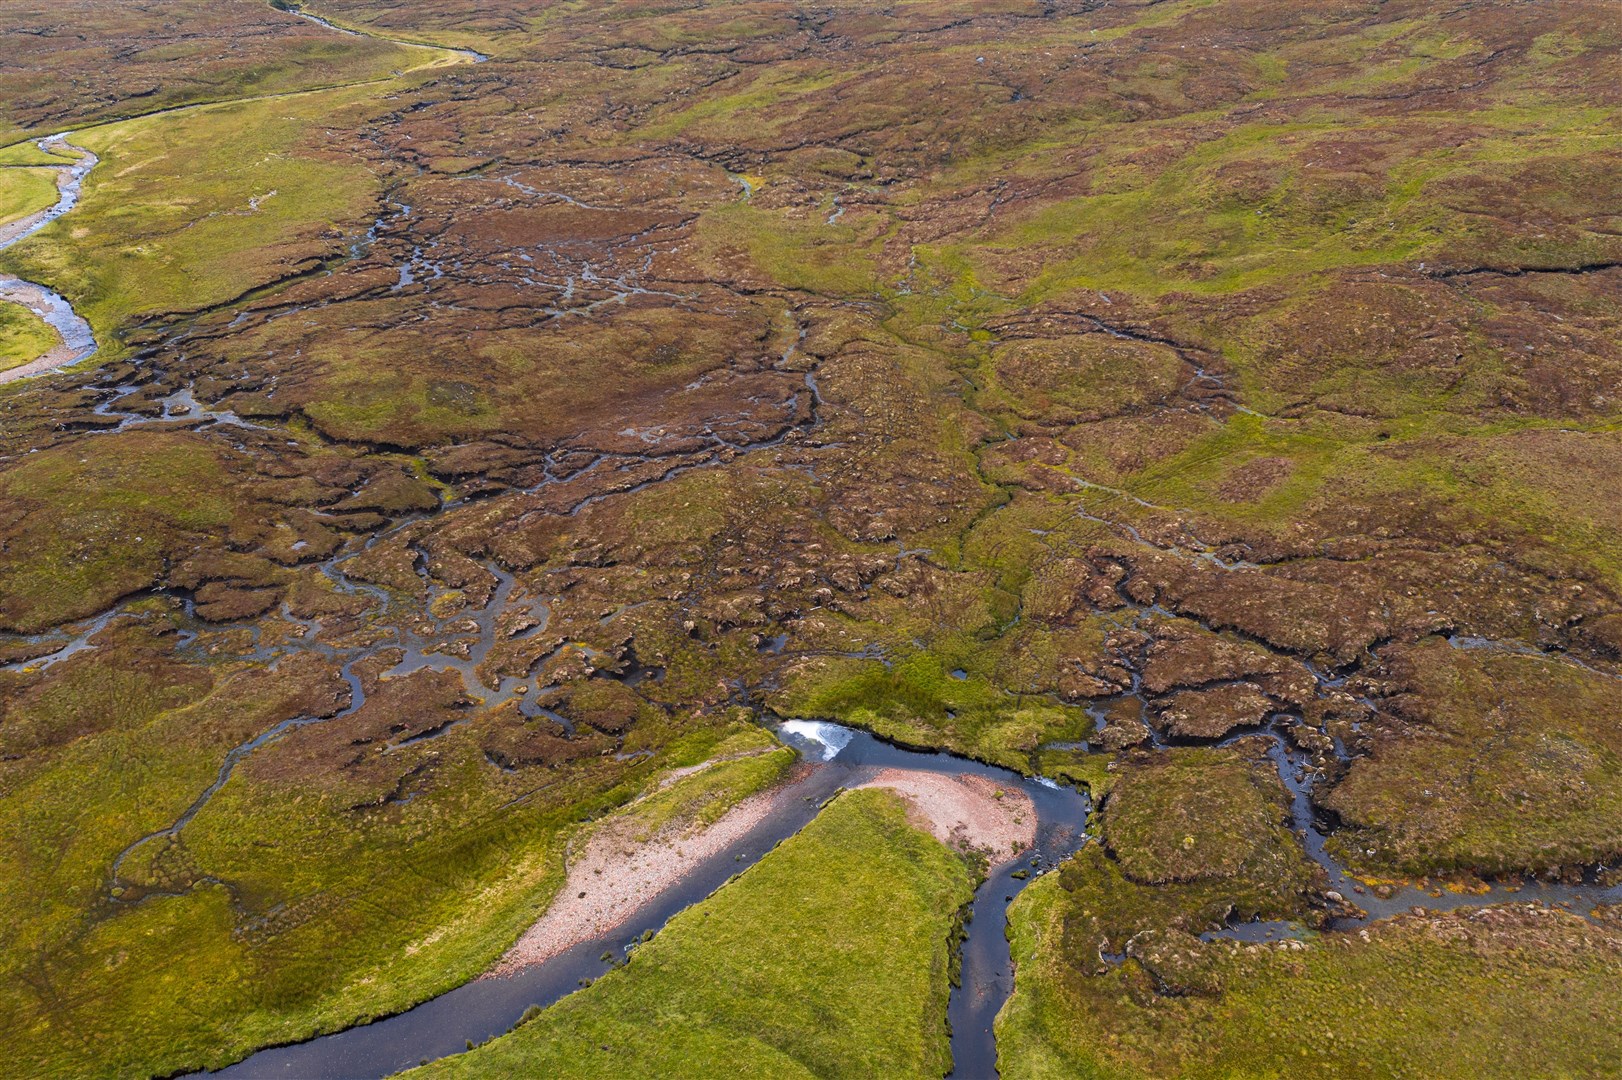 Architecture firm Halliday Fraser Munro is supporting patland restoration in Wester Ross to offset its carbon usage.